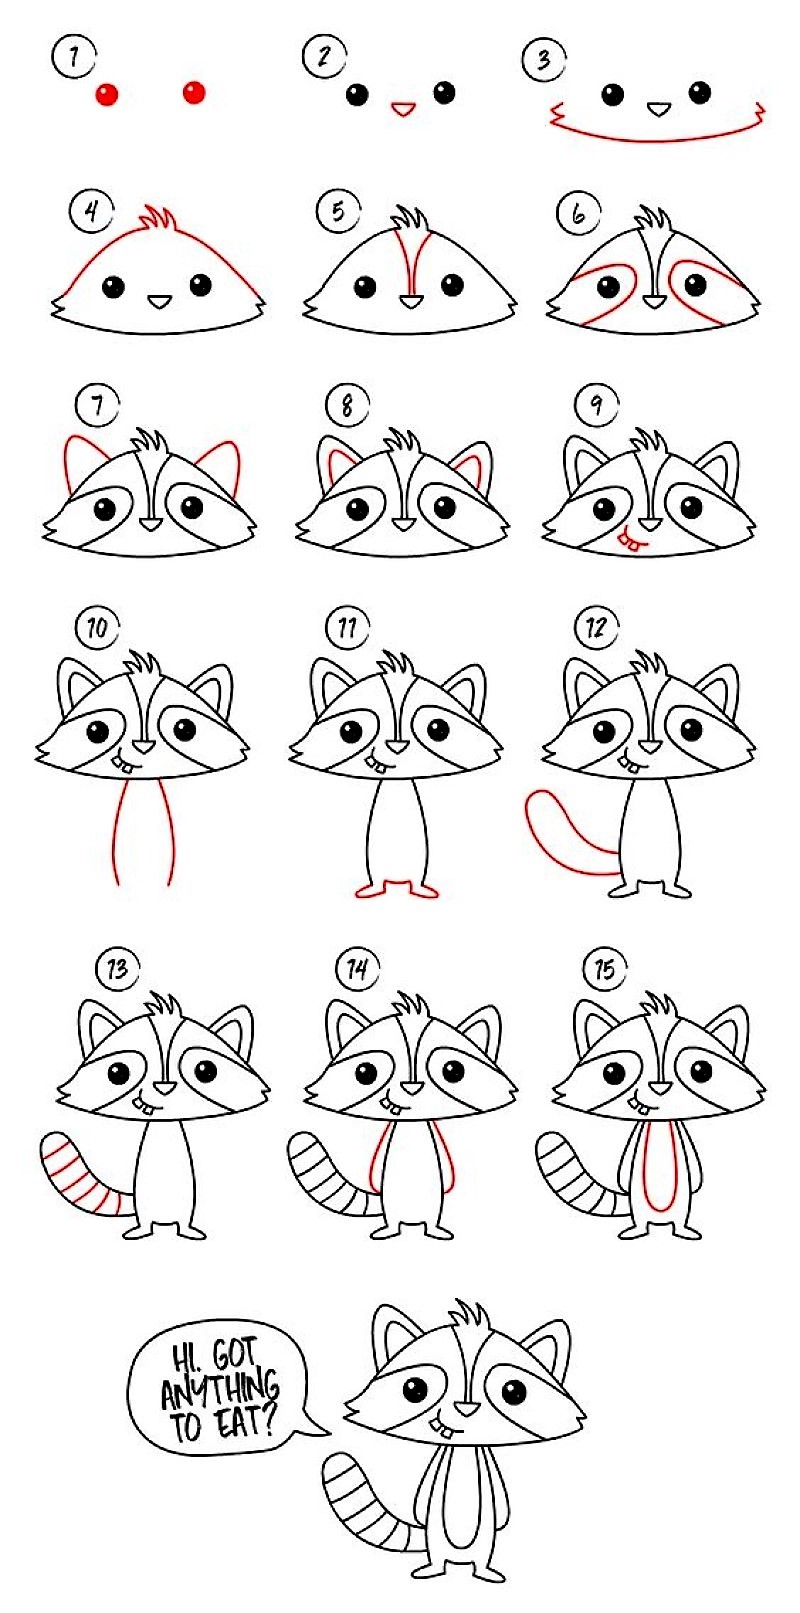 How to draw A Raccoon Idea 14